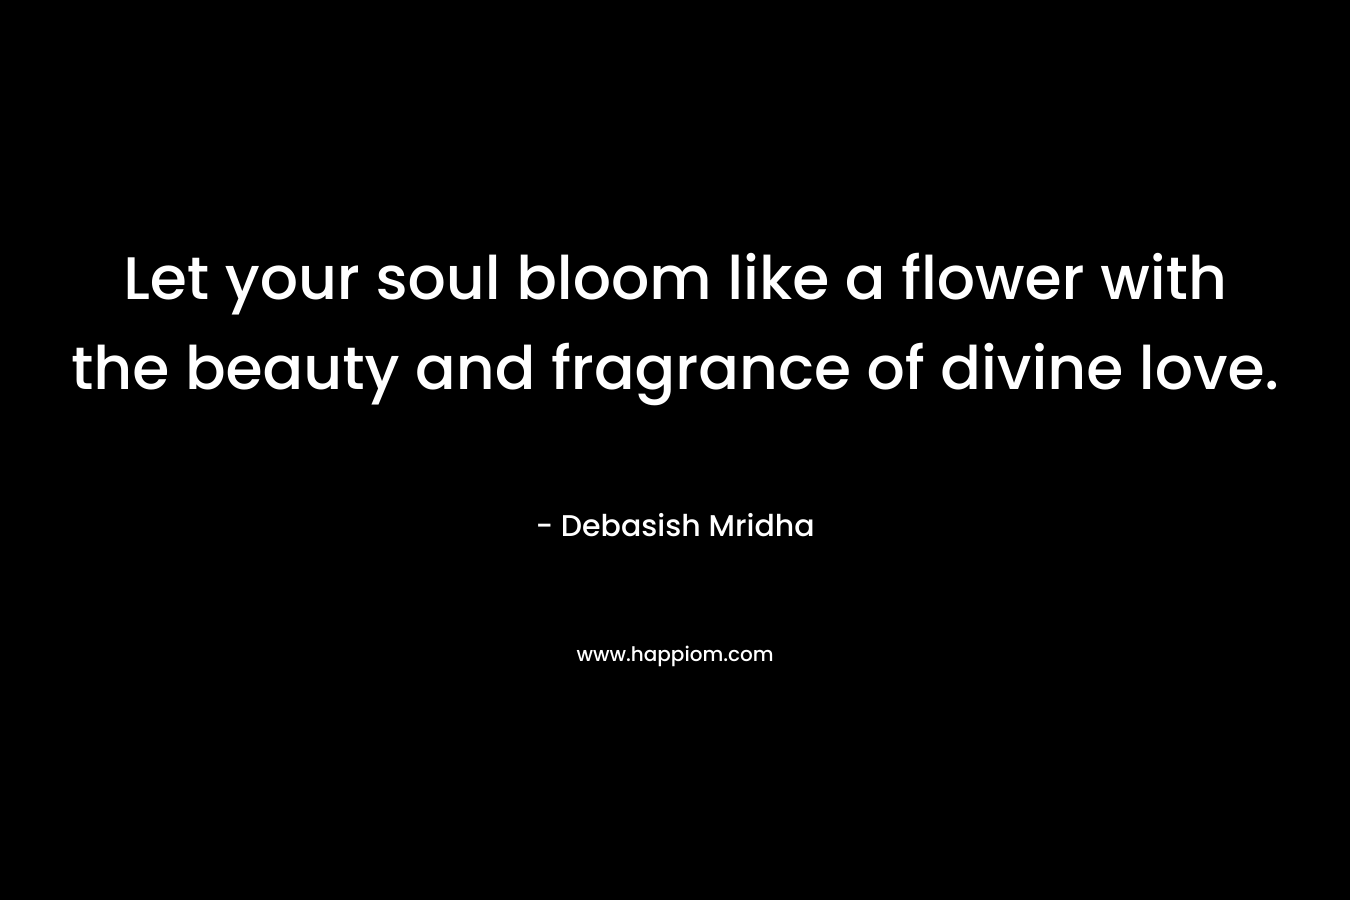 Let your soul bloom like a flower with the beauty and fragrance of divine love. – Debasish Mridha